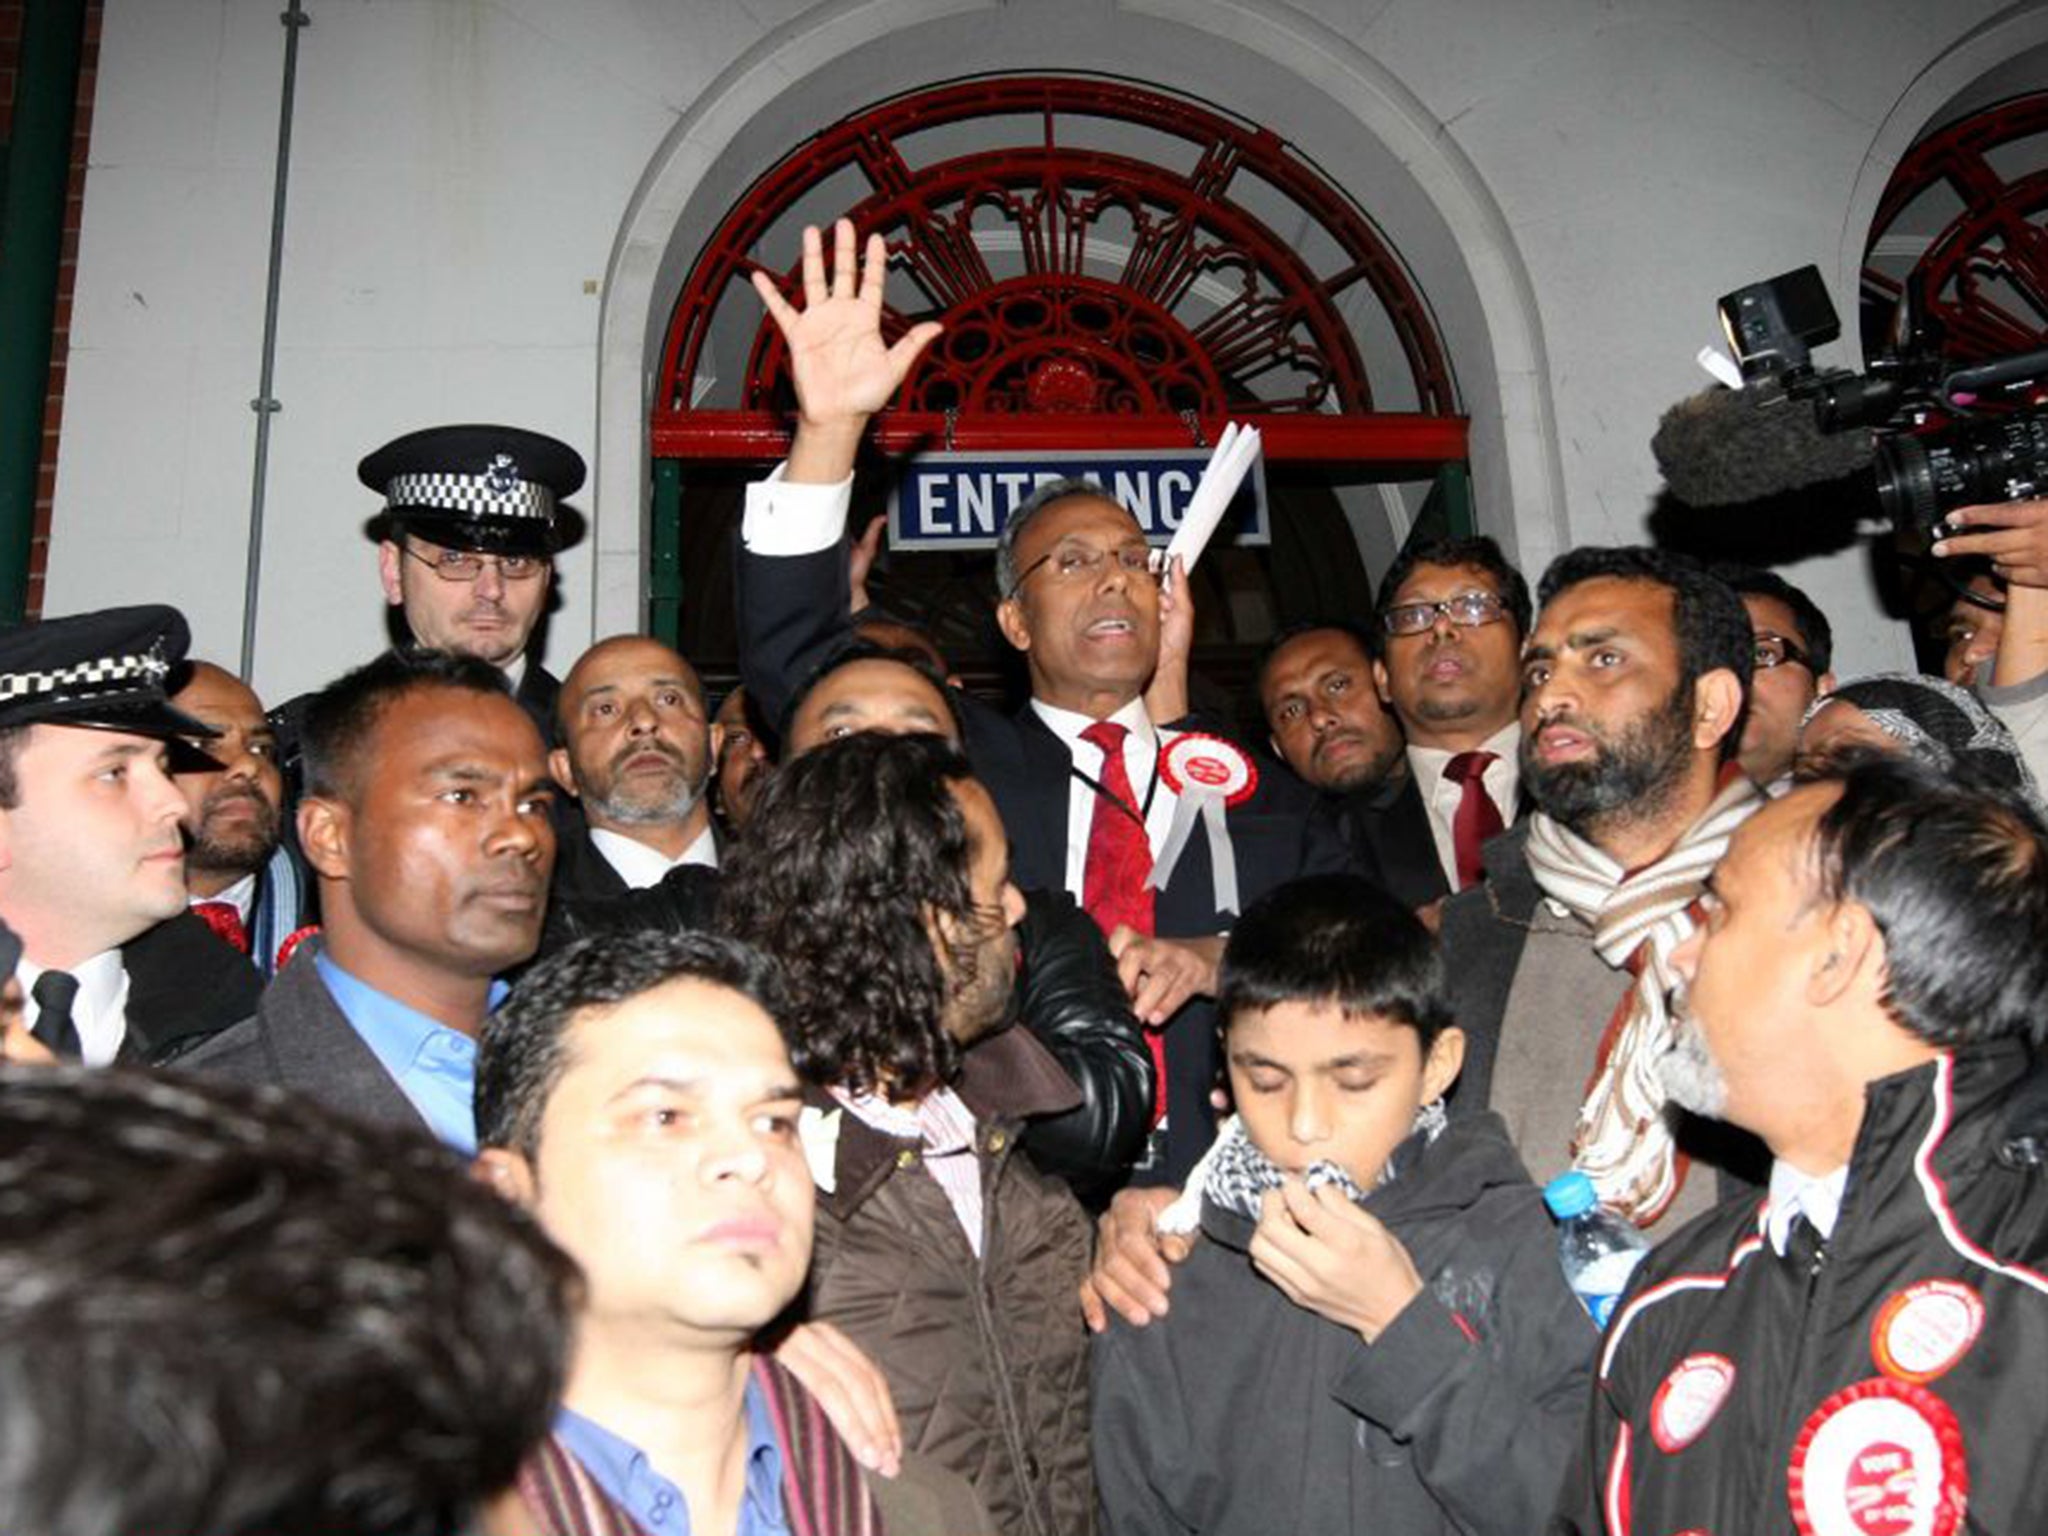 Lutfur Rahman was re-elected as mayor of Tower Hamlets in 2014 after four years in the role (Rex)